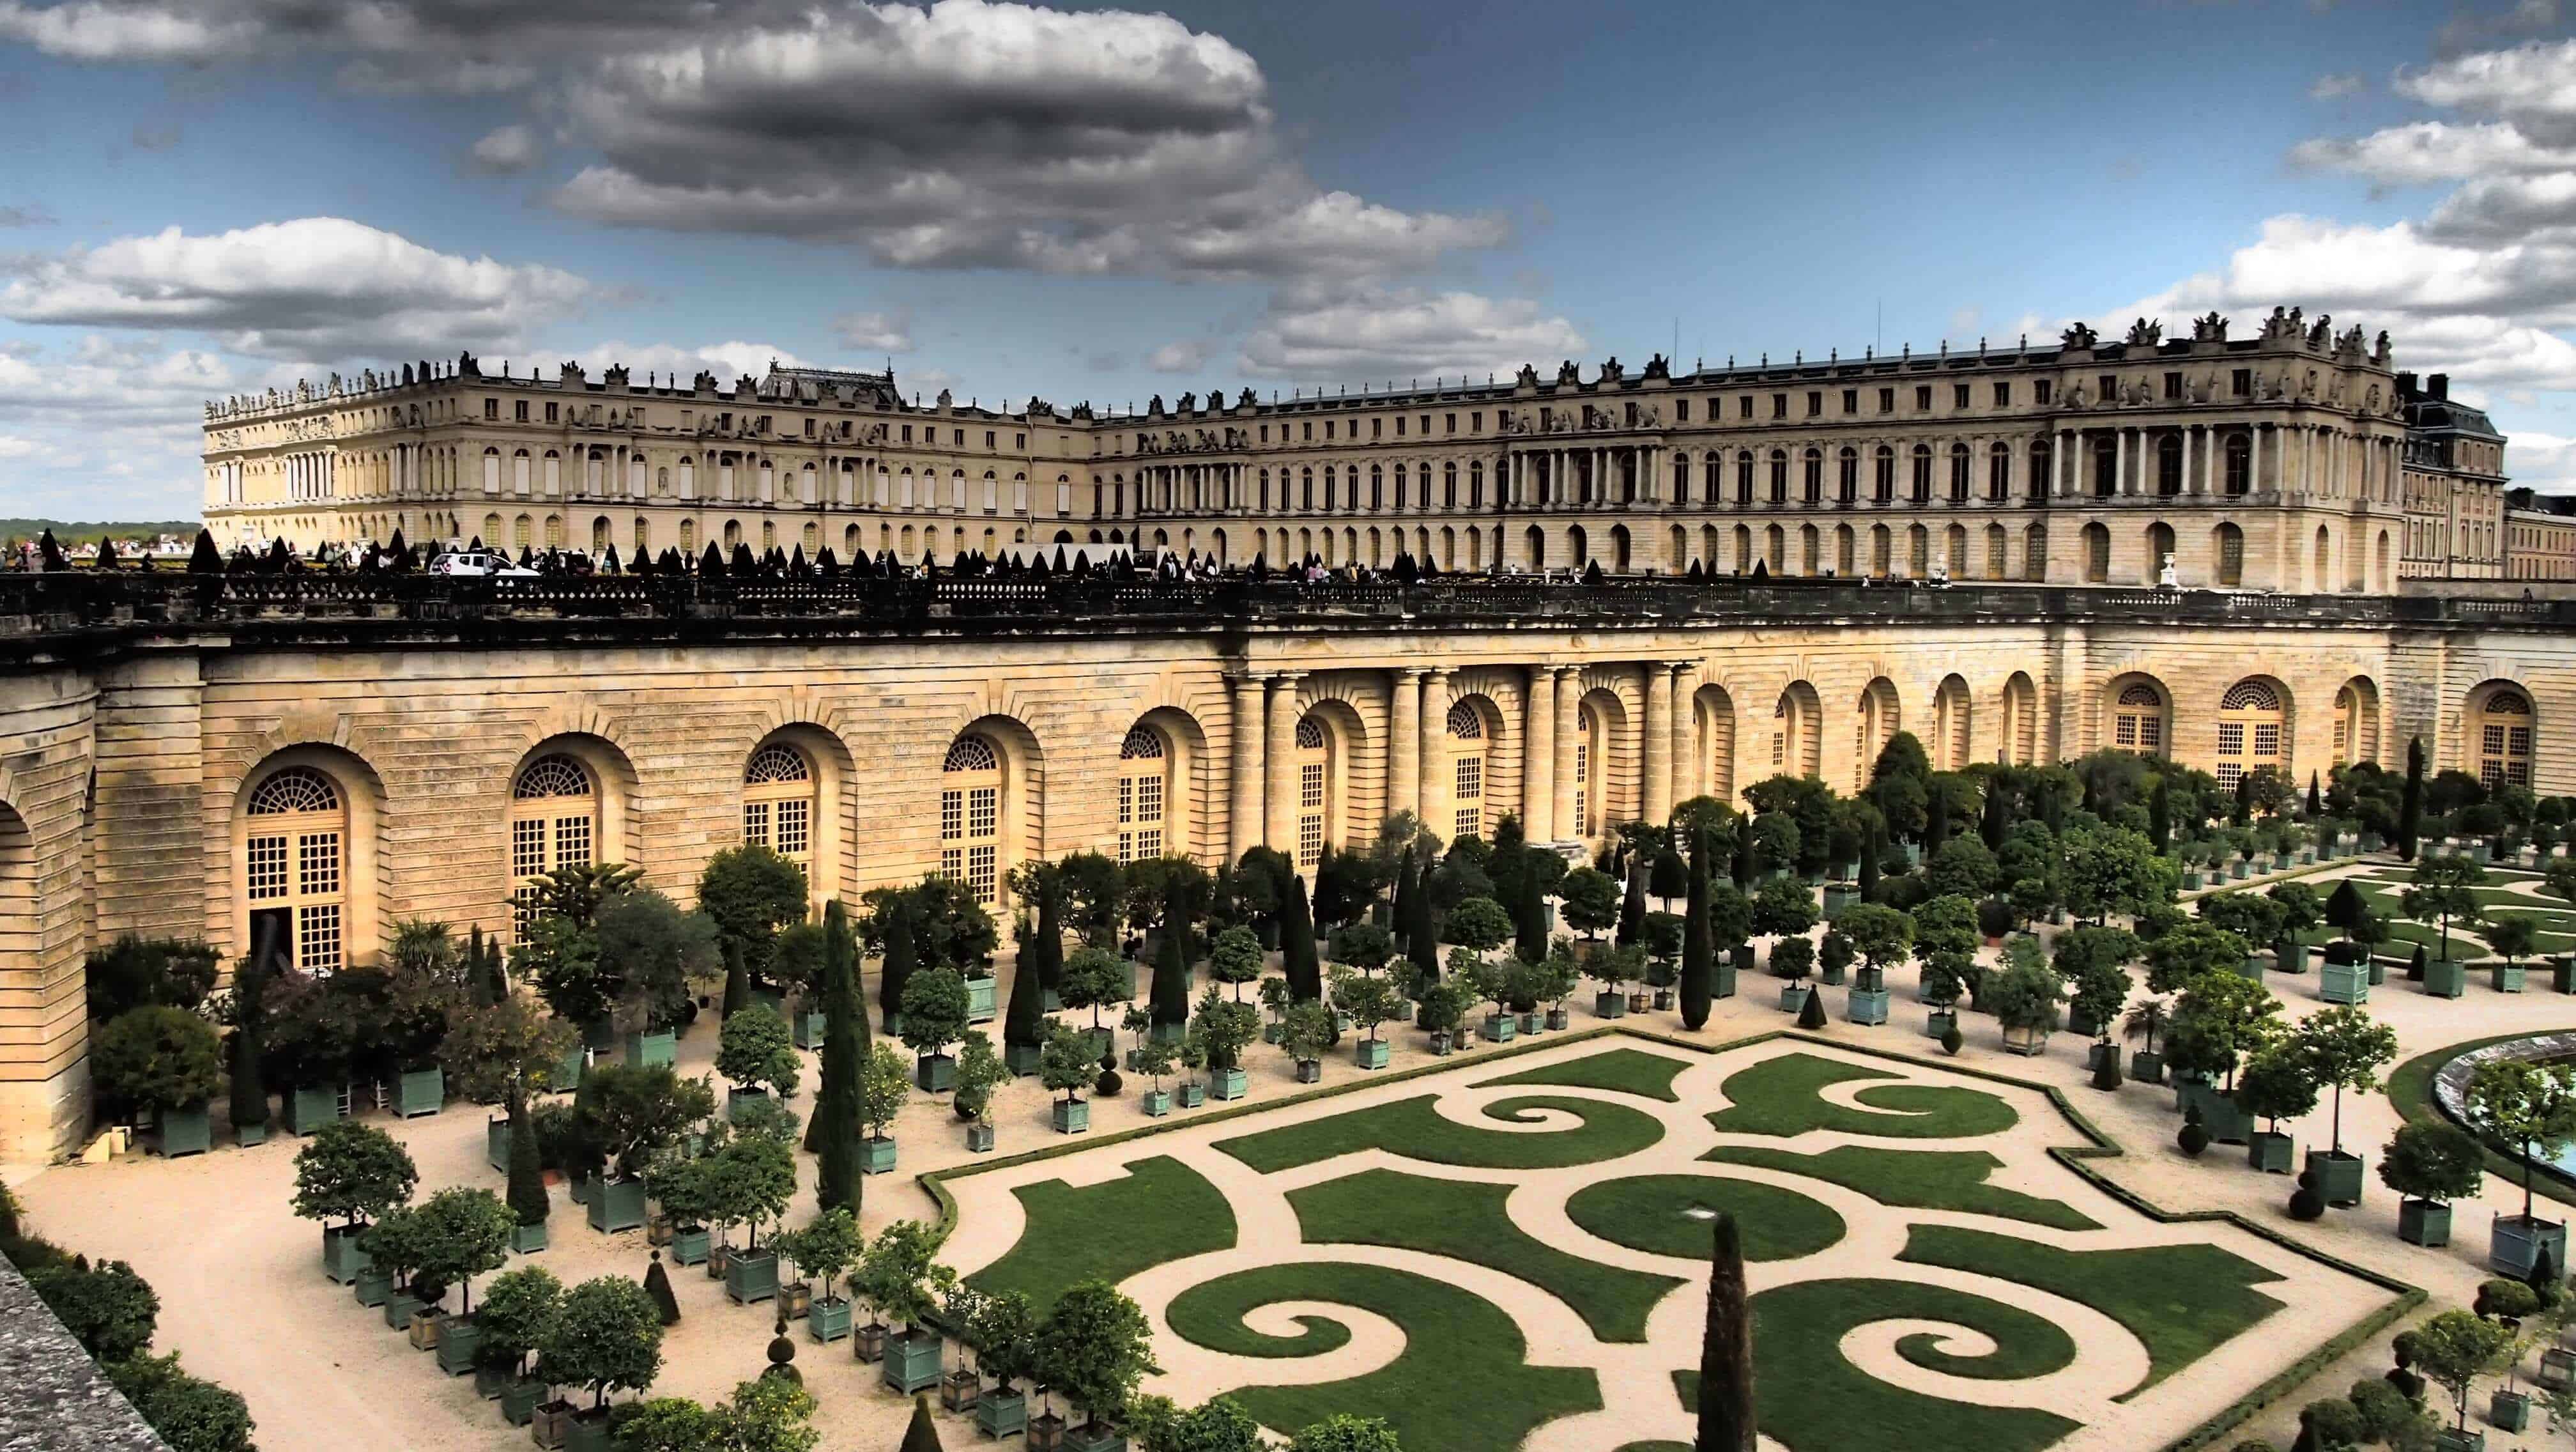 A detailed guide to visit the Chateau de Versailles